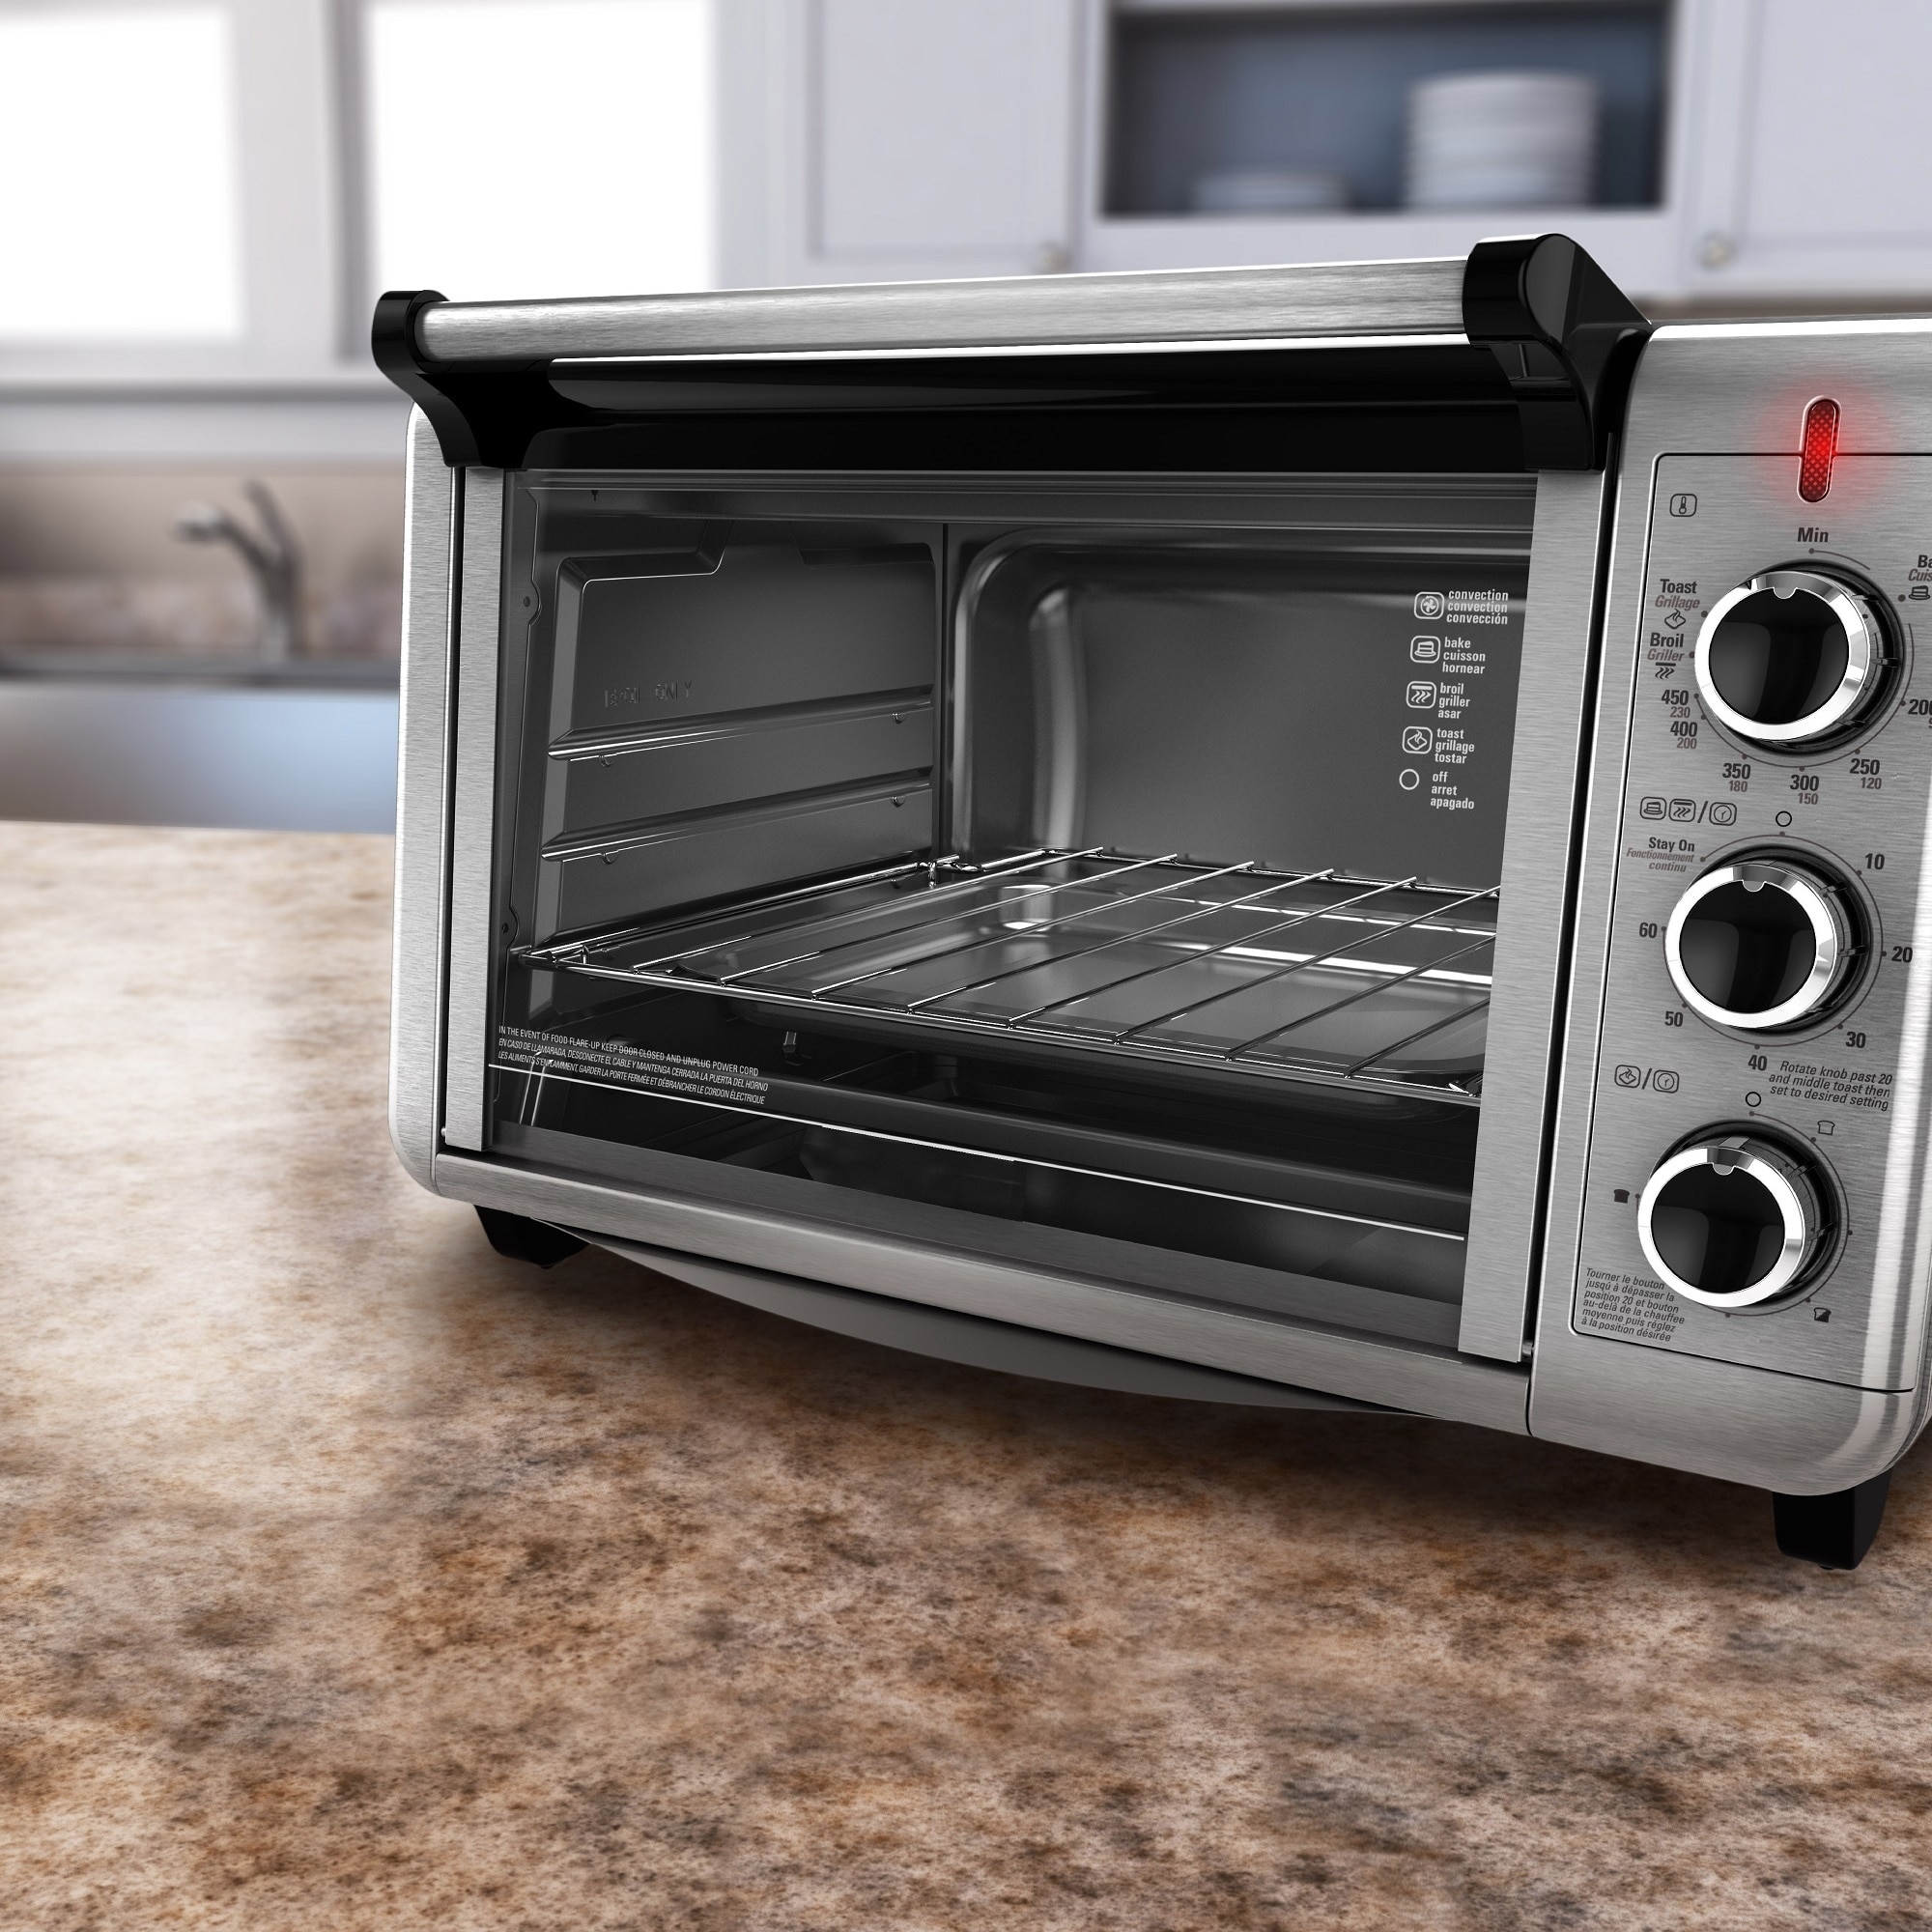 https://ak1.ostkcdn.com/images/products/30725296/Black-Decker-TO3210SSD-6-Slice-Counter-Top-Toaster-Oven-Silver-5972db9c-df9a-46ff-8809-abf054debe37.jpg